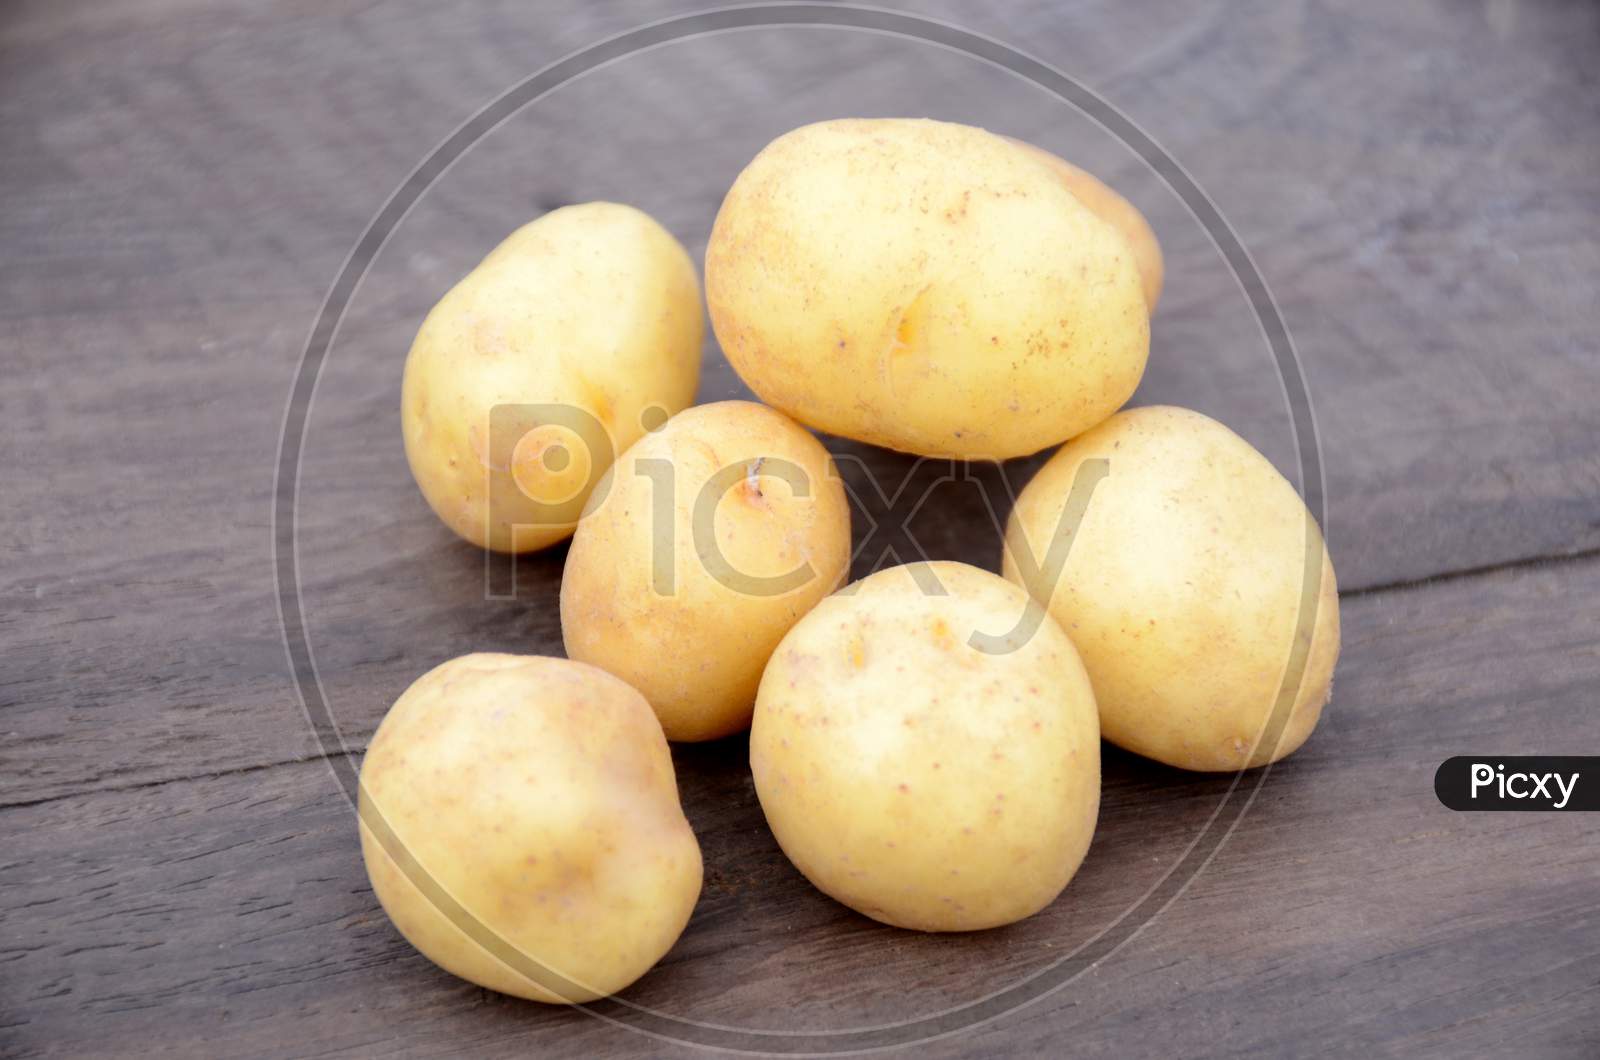 Bunch The Fresh Ripe Potato On The Wooden Background.